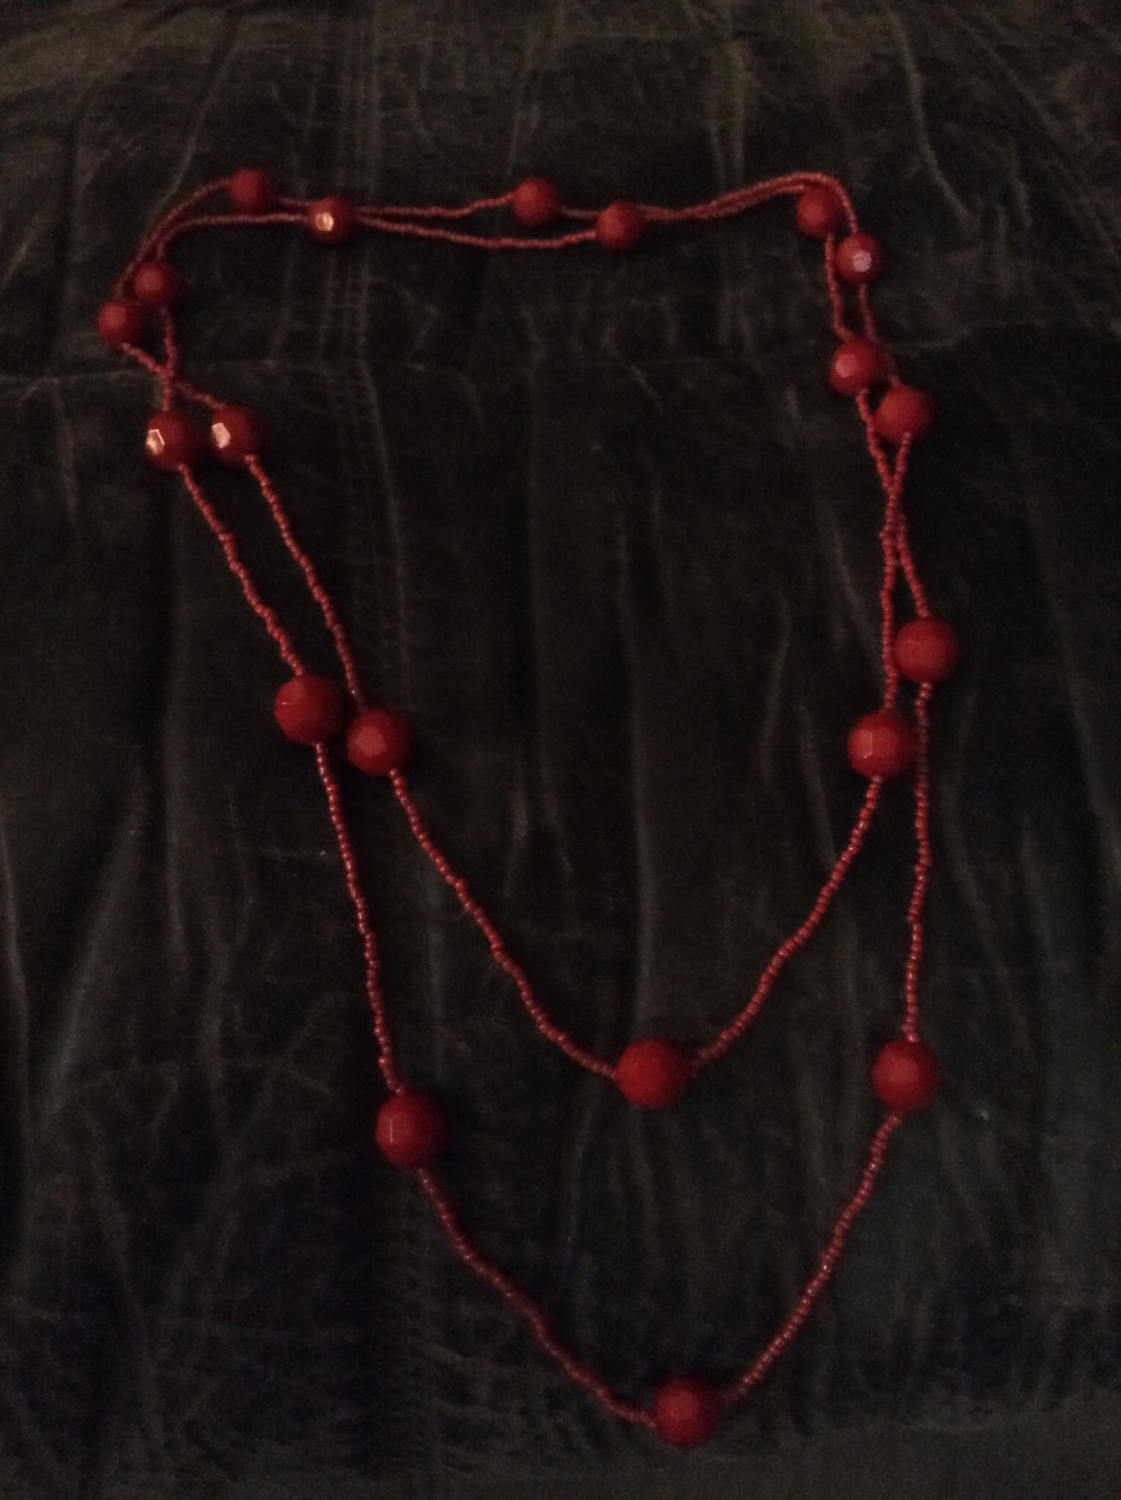 Red necklace #3 facilitate remote viewing, astral projection and out of body experiences 